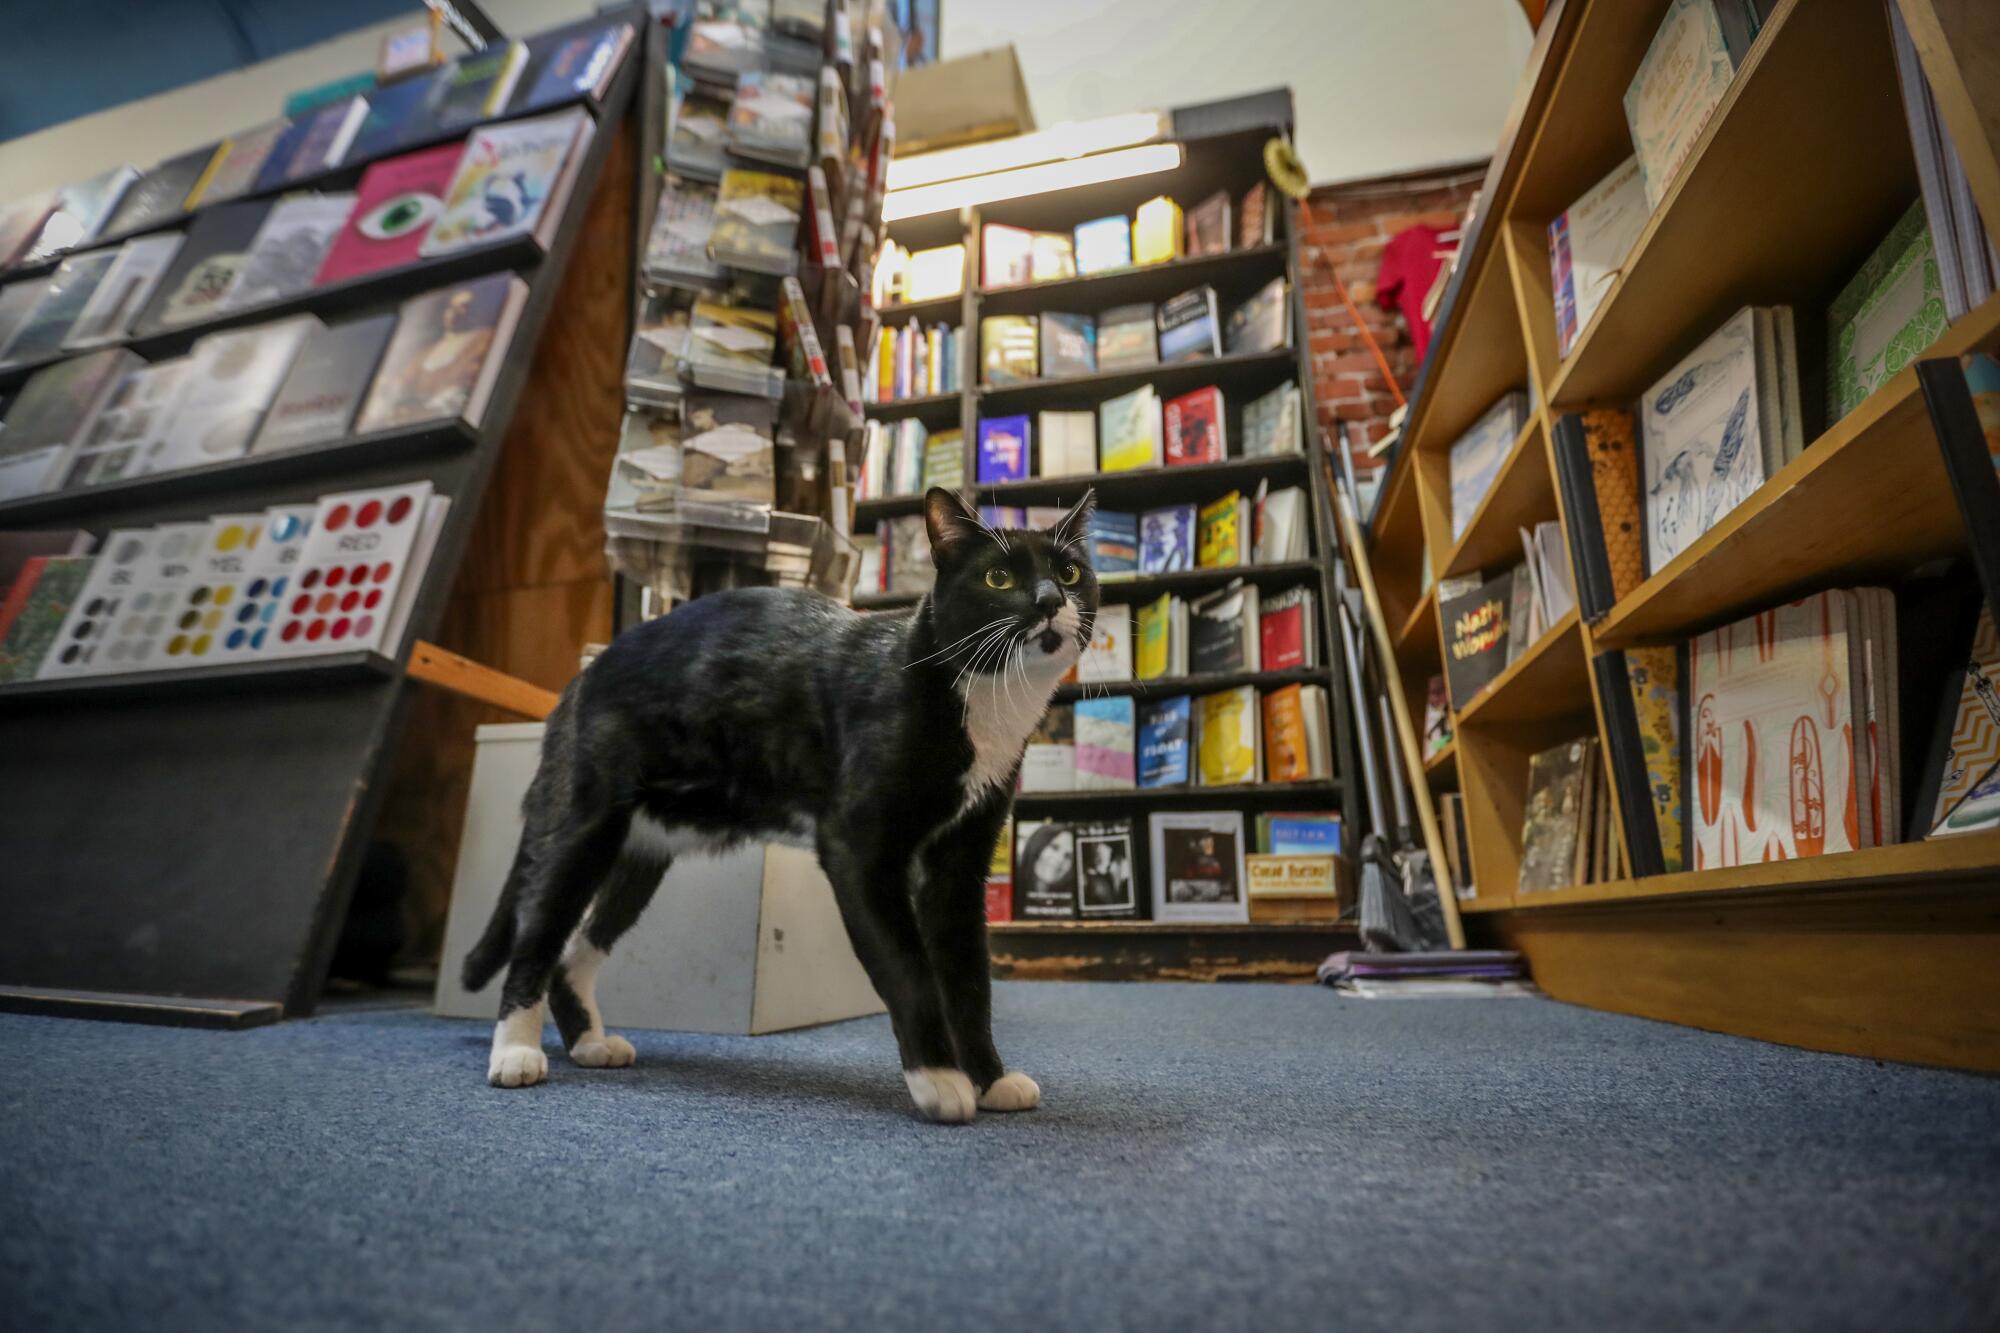 A black-and-white cat standing among bookshelves.